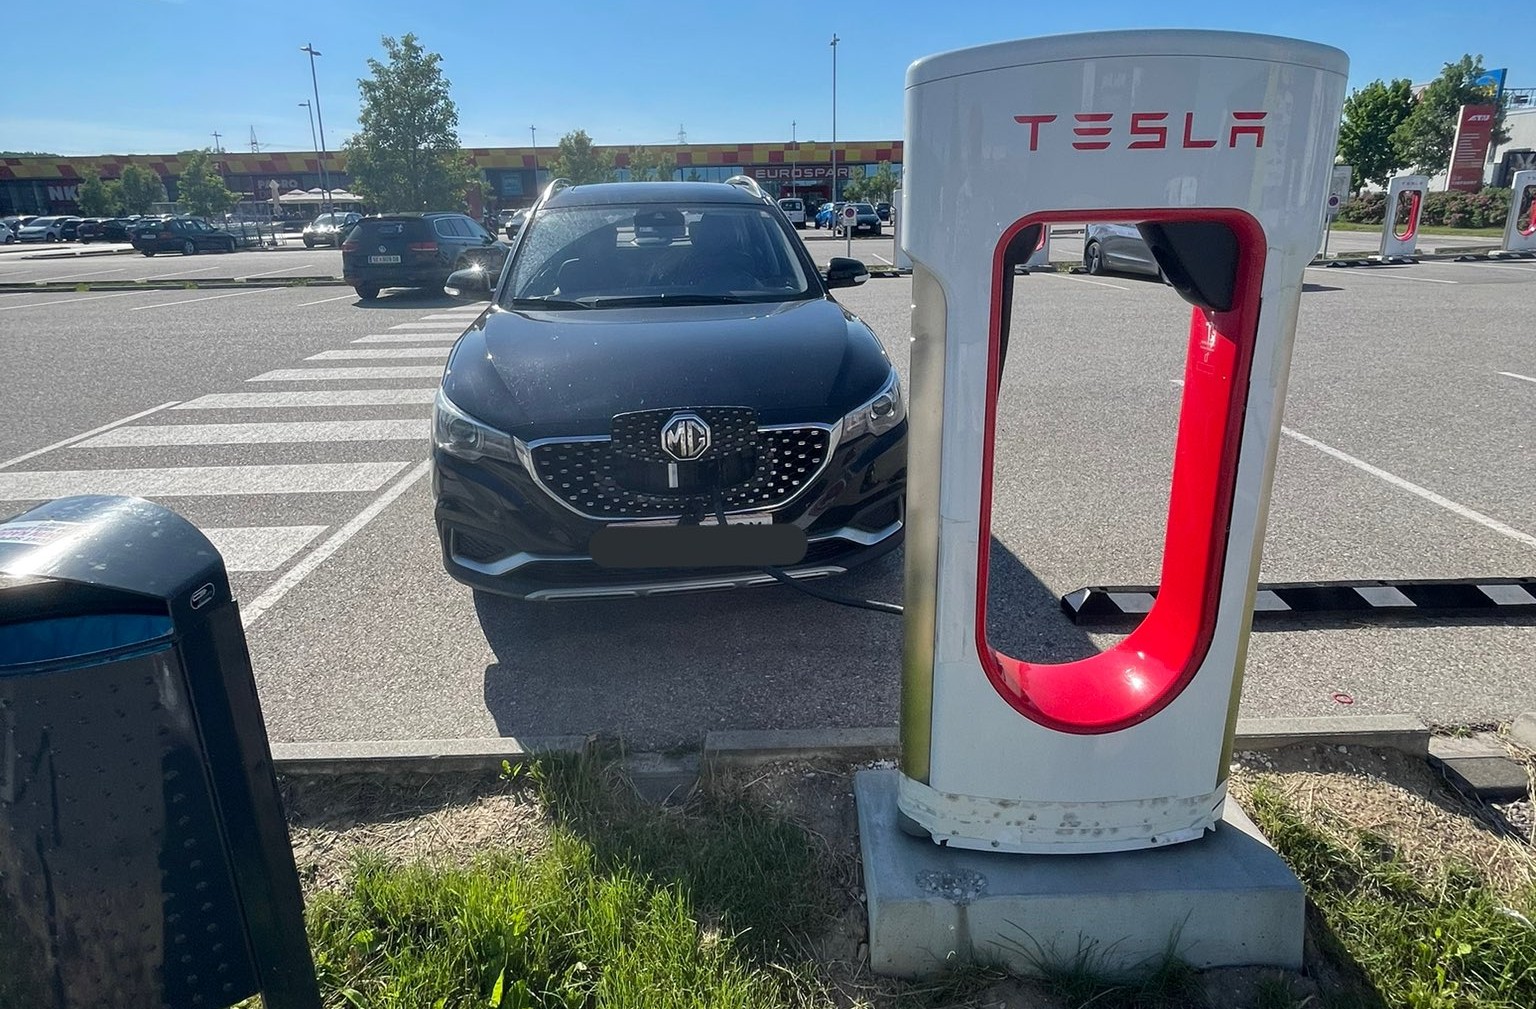 Non-Tesla Vehicles Face Higher Supercharger Fees, Subscriptions Offer Alternative